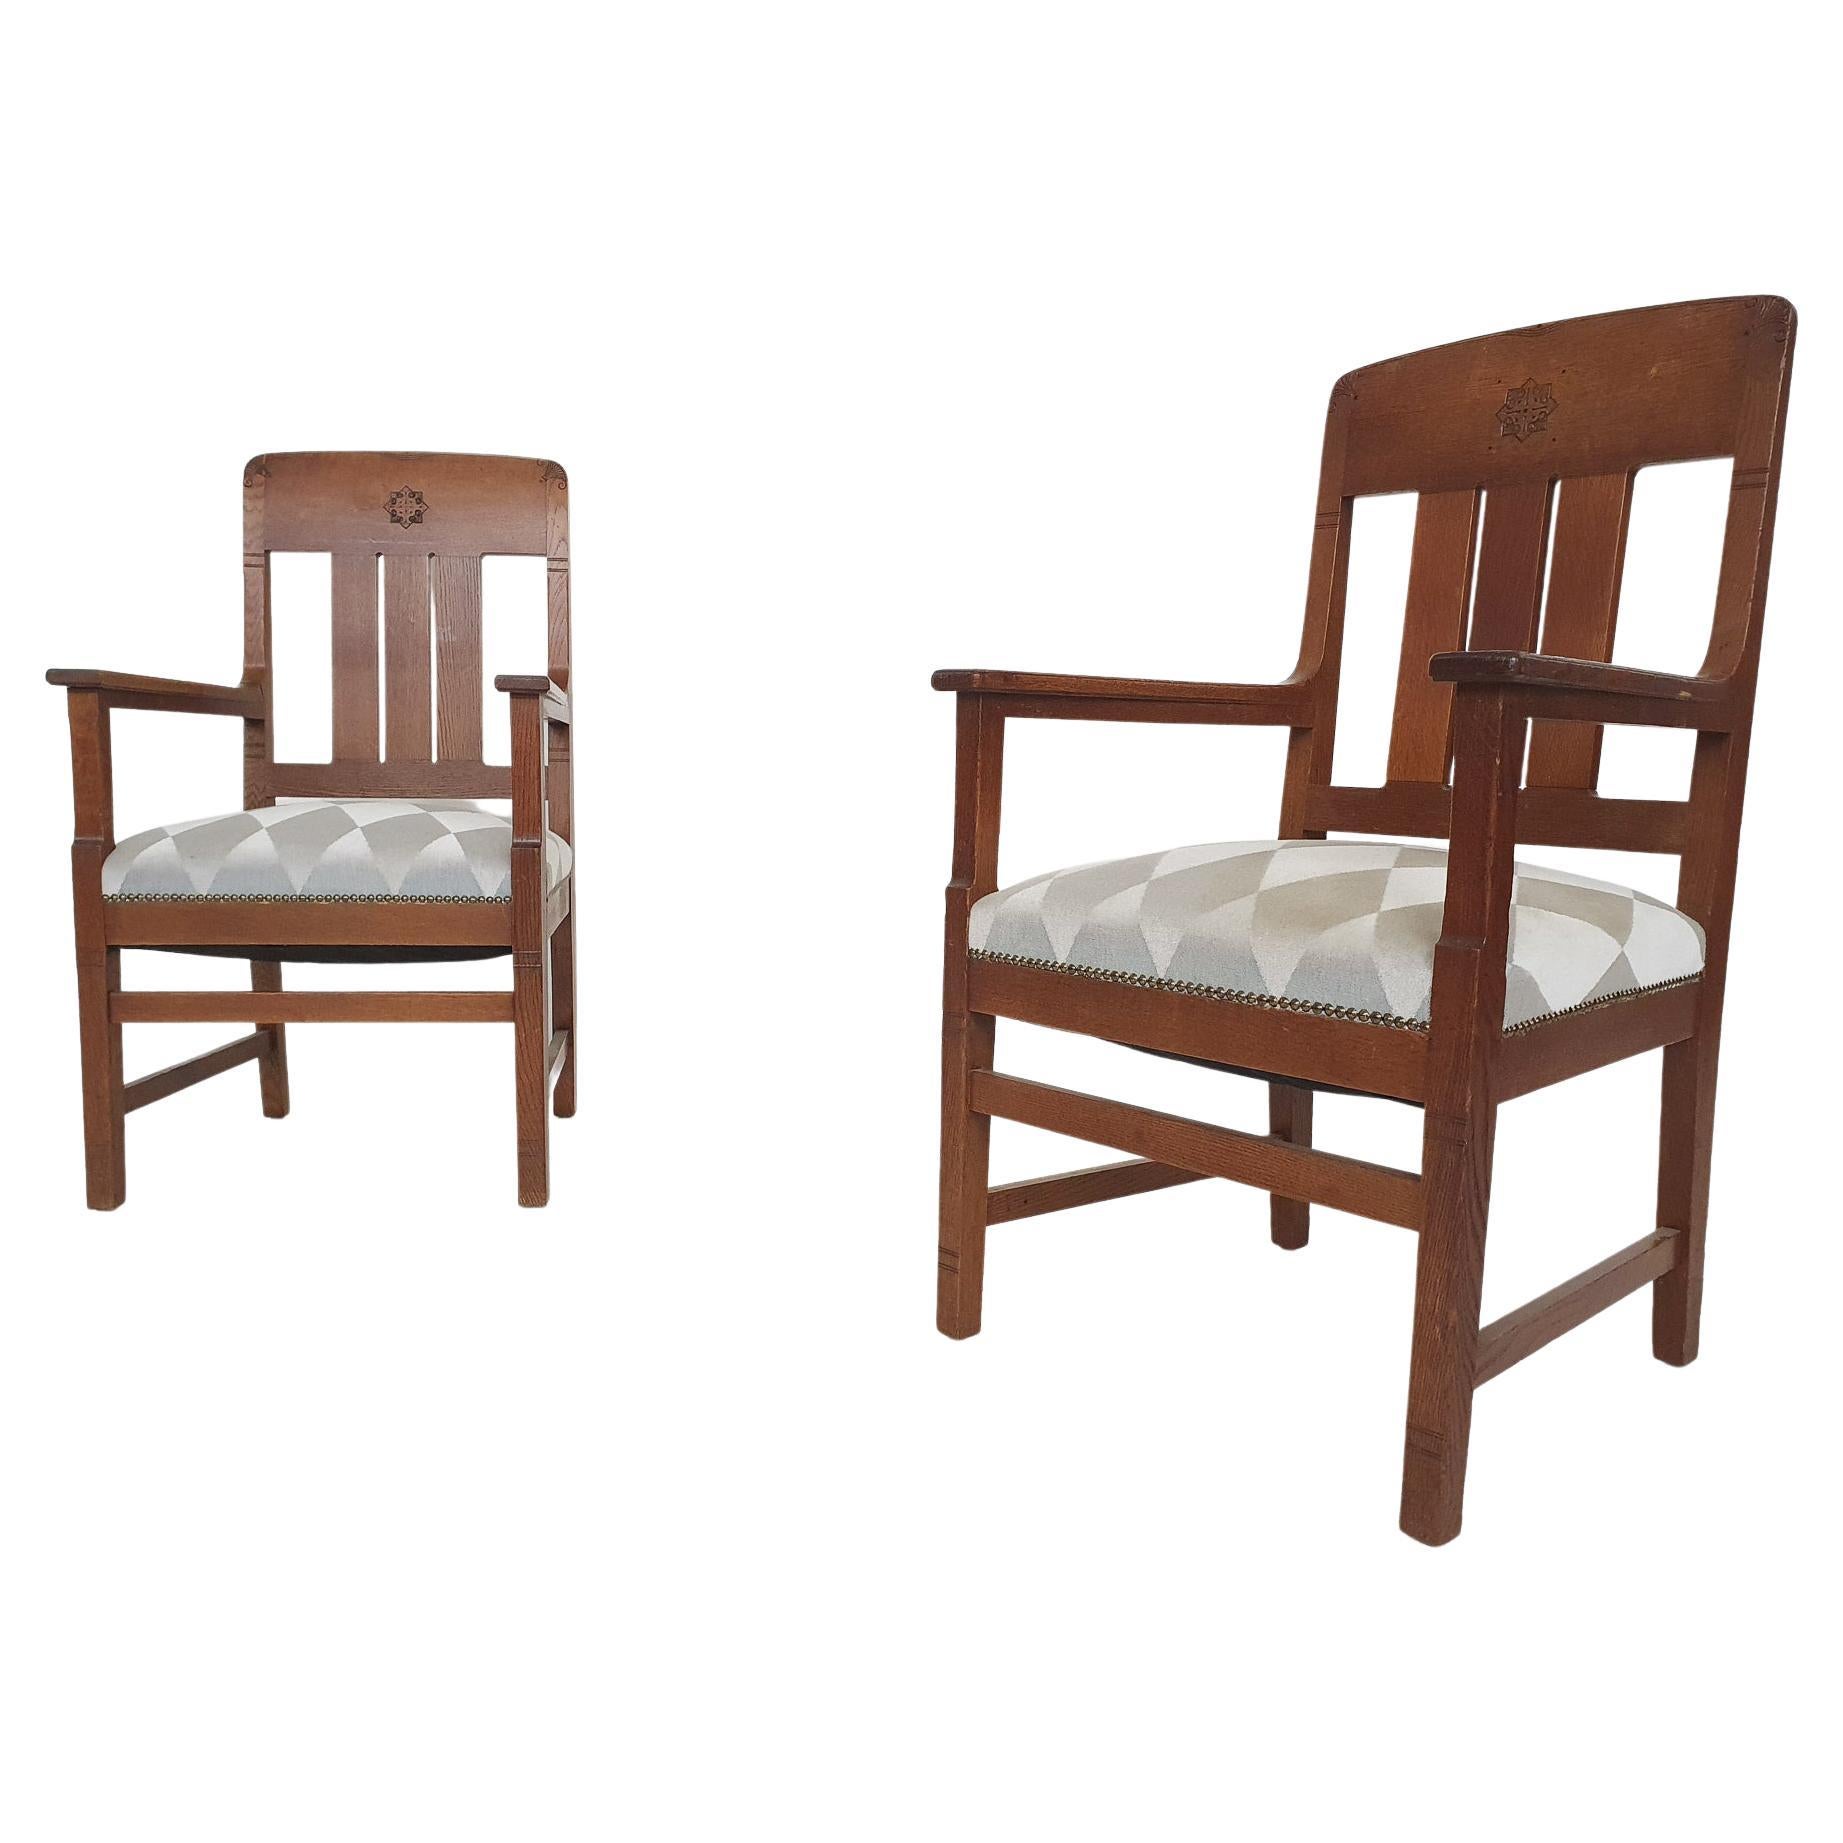 Set of Two Art Deco, Lounge Chairs, The Netherlands 1930's For Sale